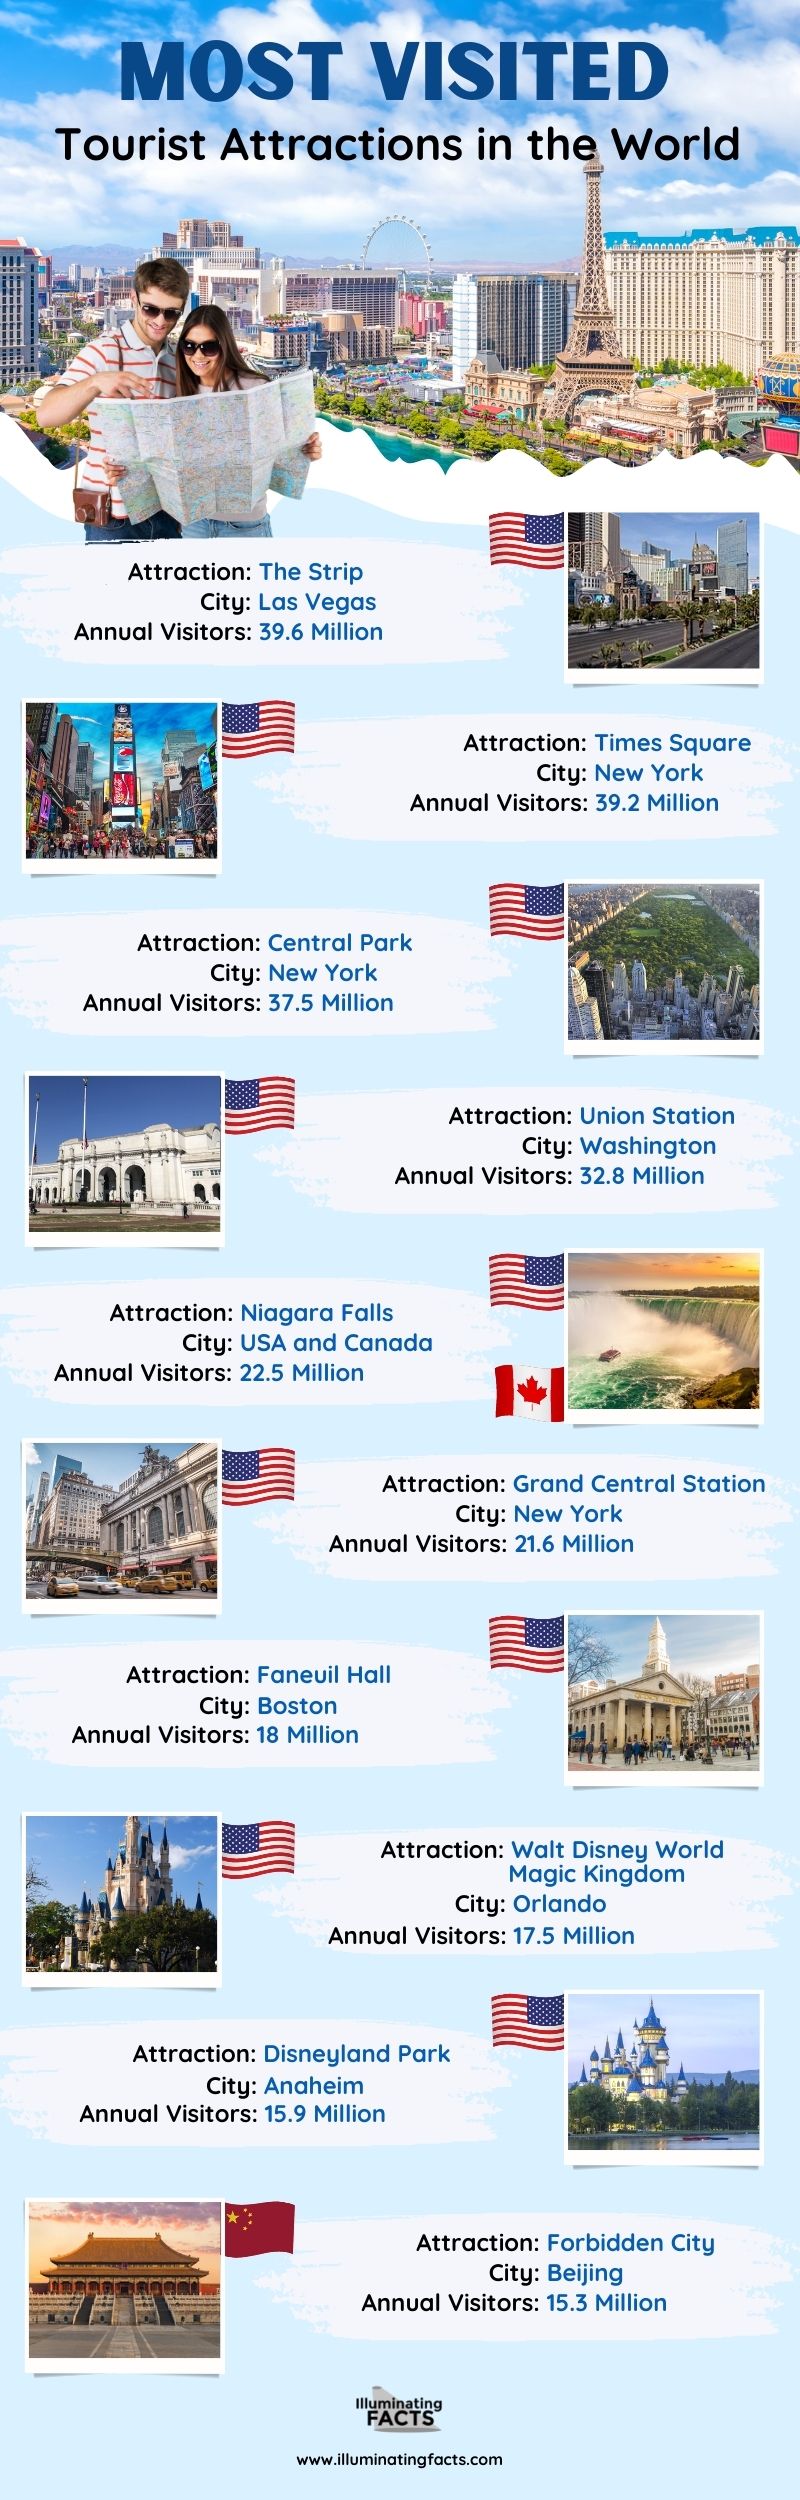 Most Visited Tourist Attractions in the World